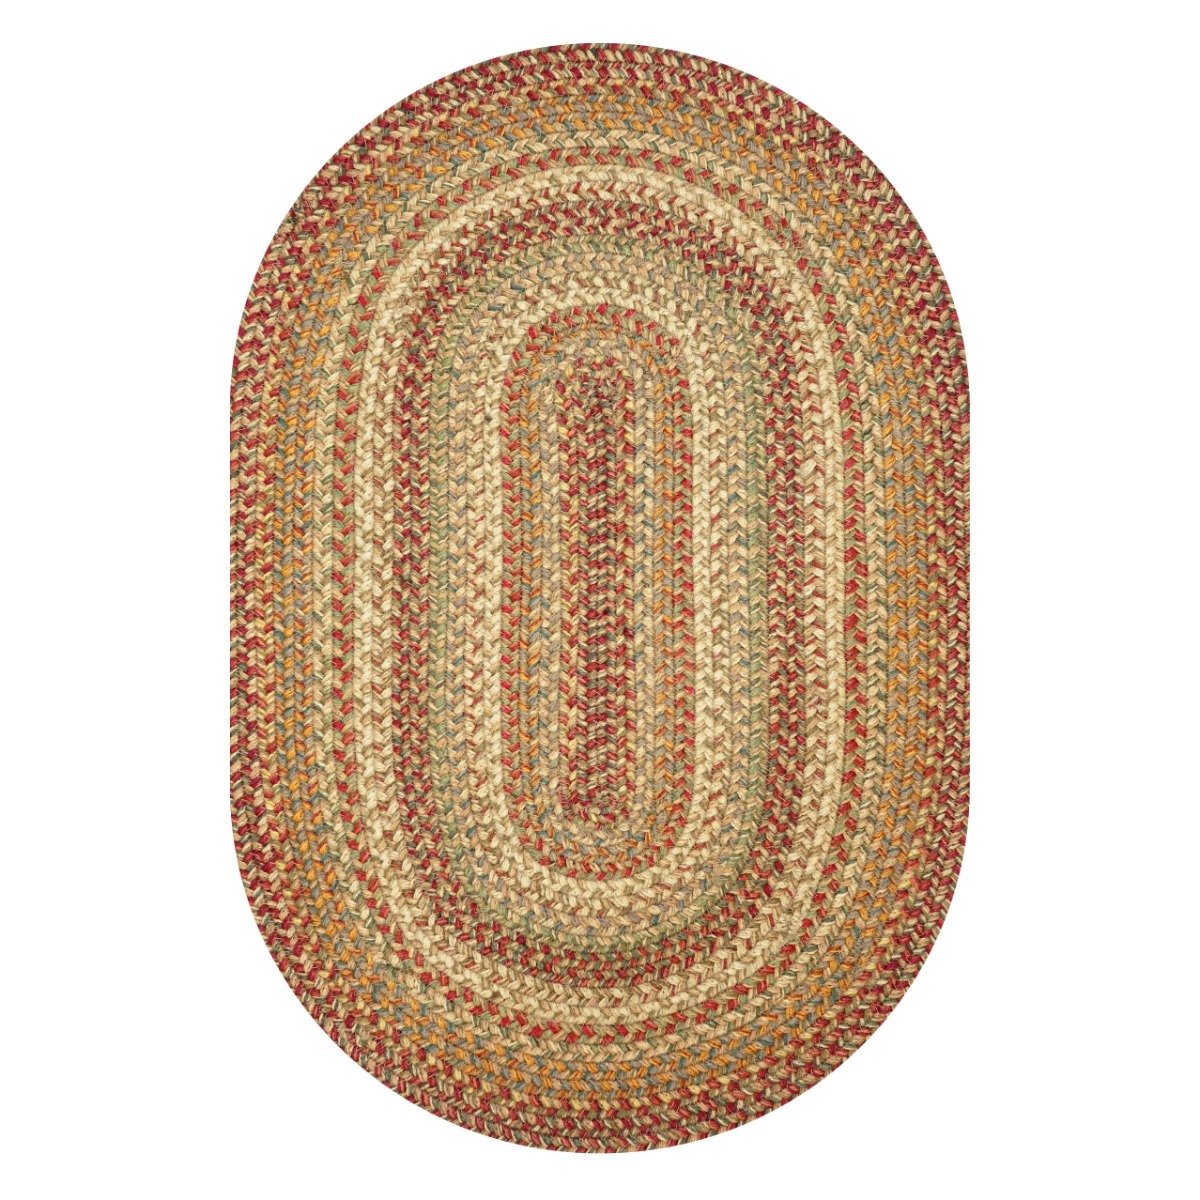 Oval Braided Rugs - Washable, Pet-friendly, Easy to Clean